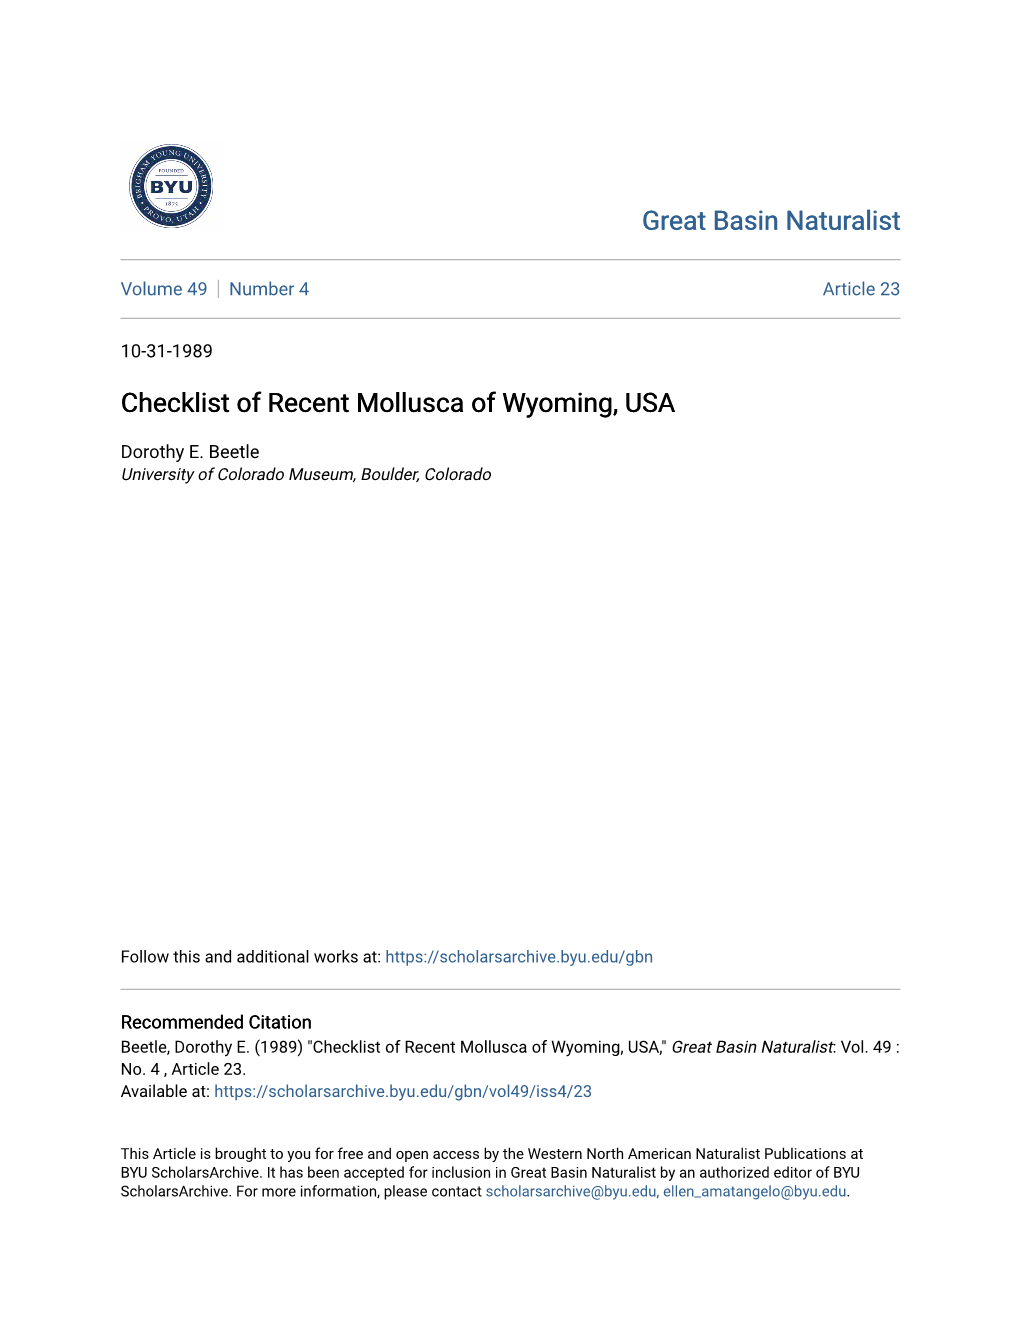 Checklist of Recent Mollusca of Wyoming, USA